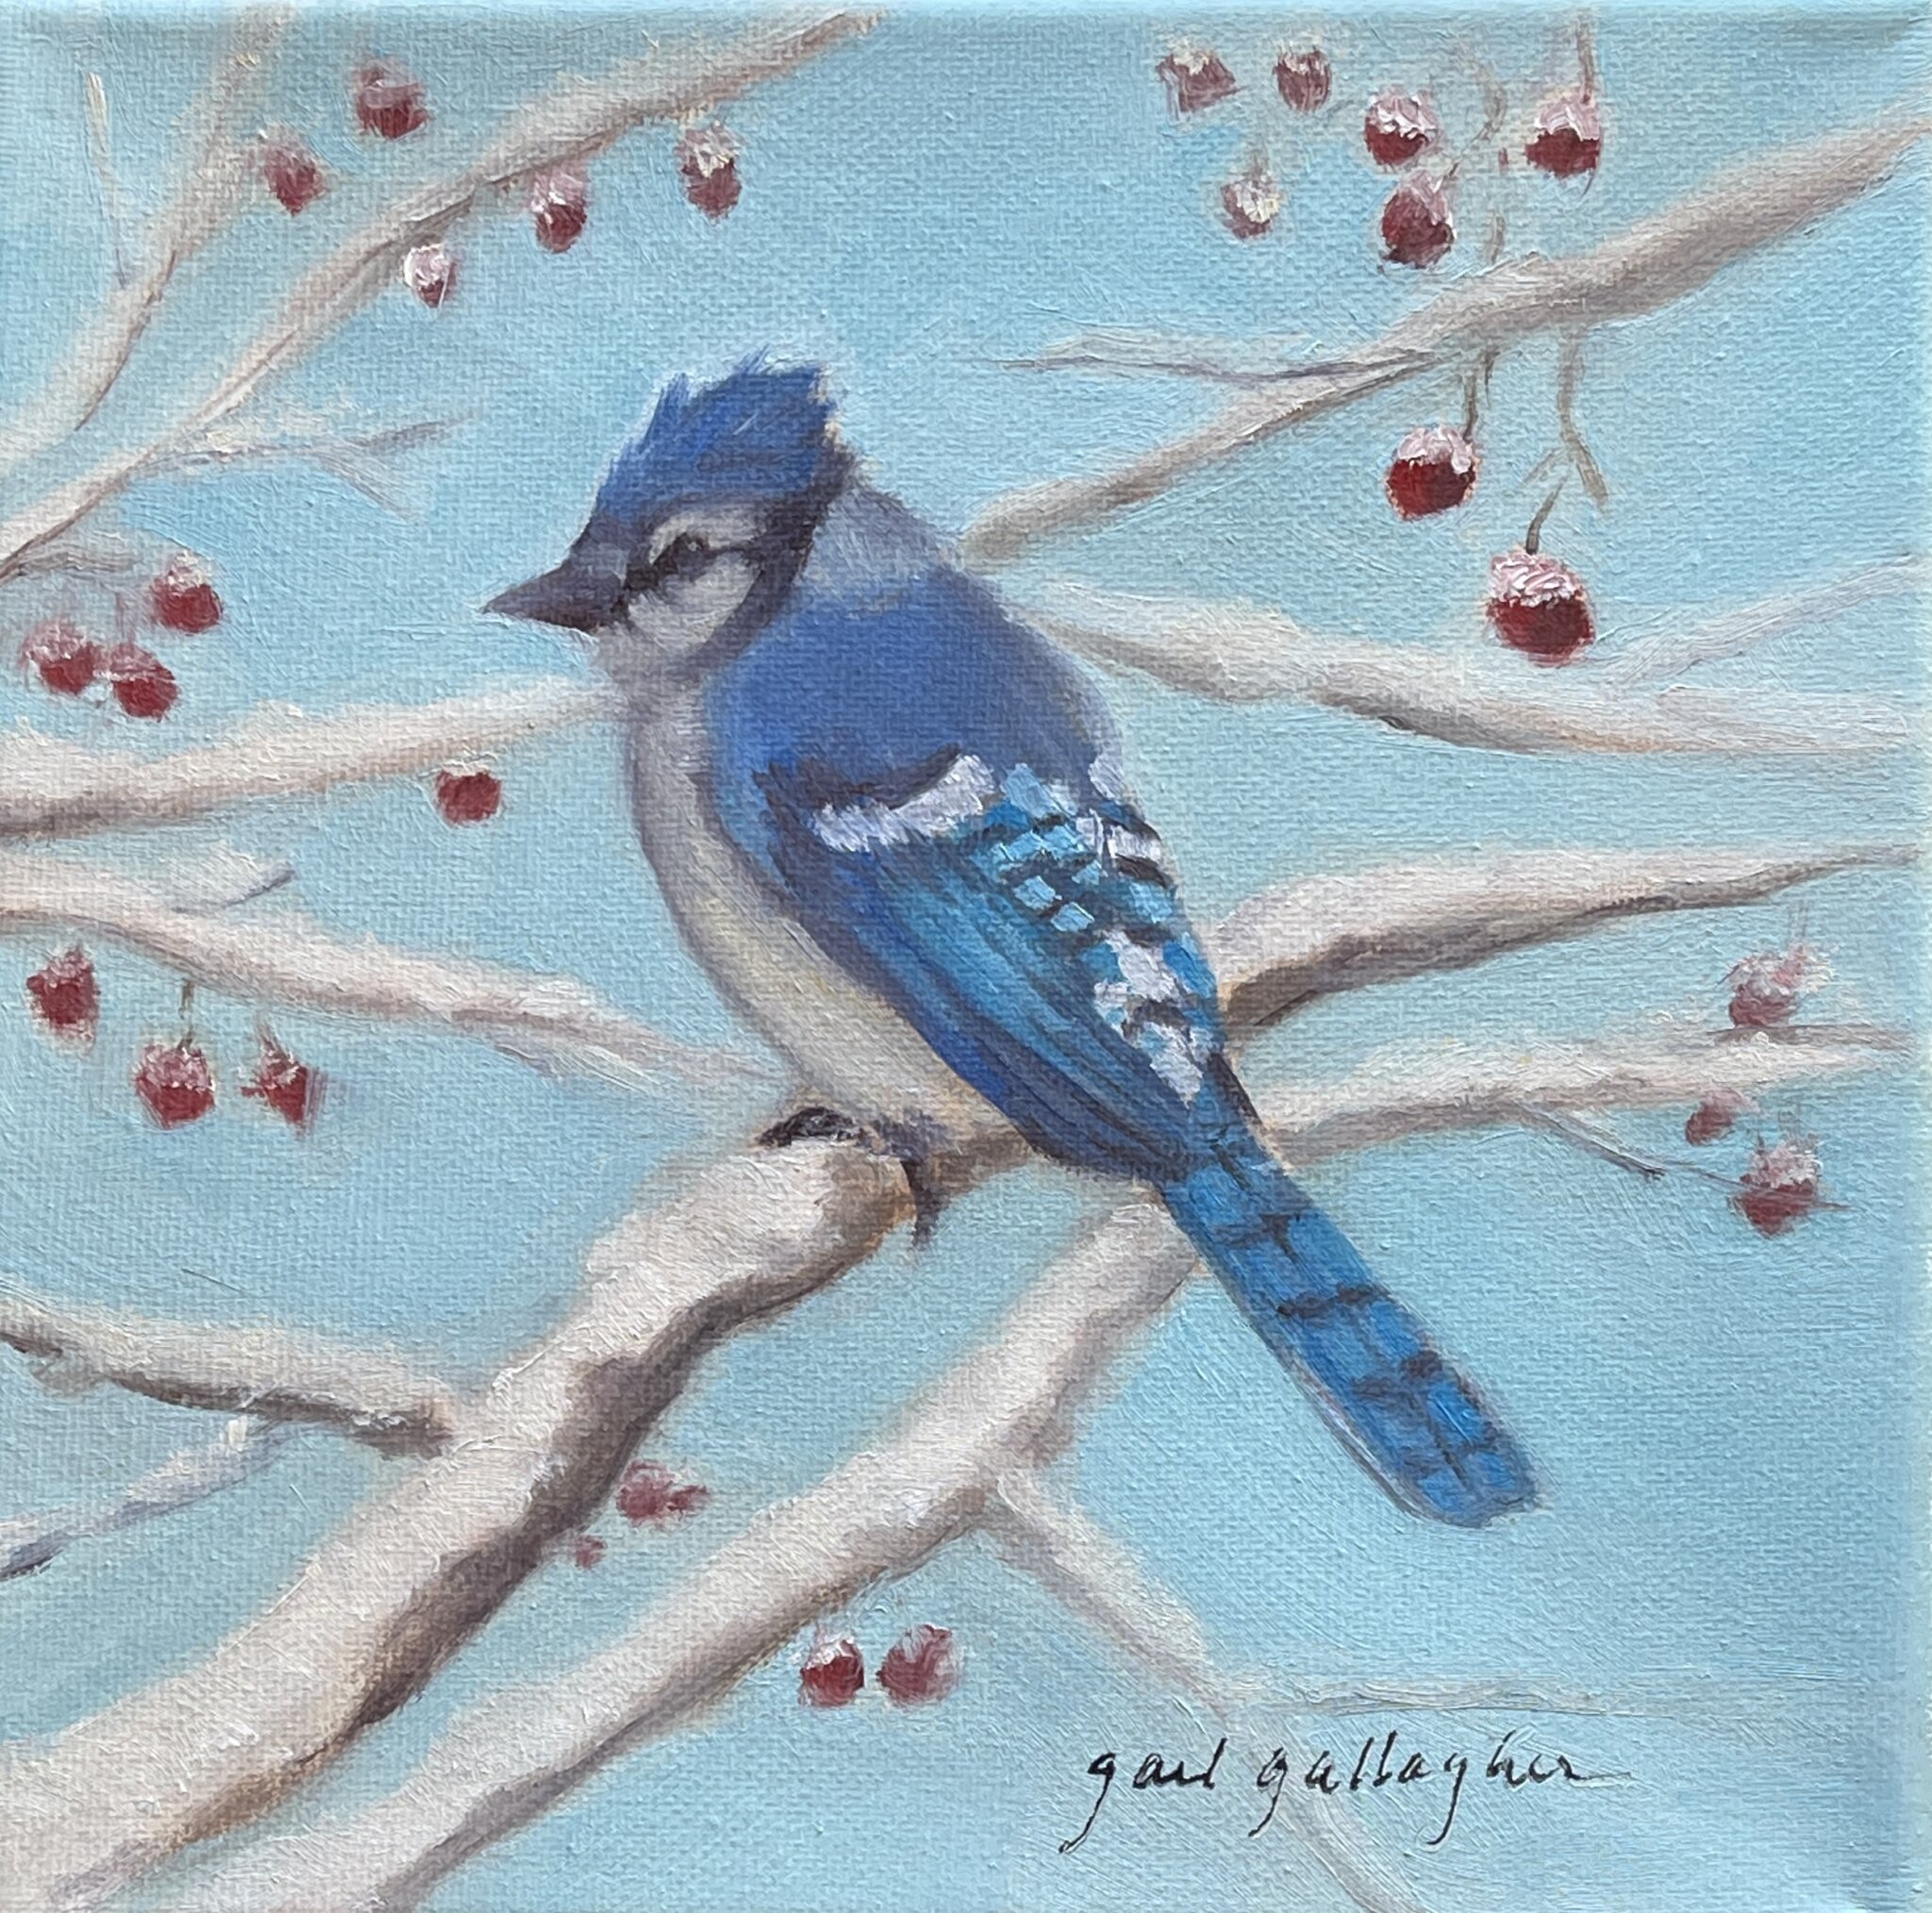 Gail Gallagher's "Winter Blue Jay"